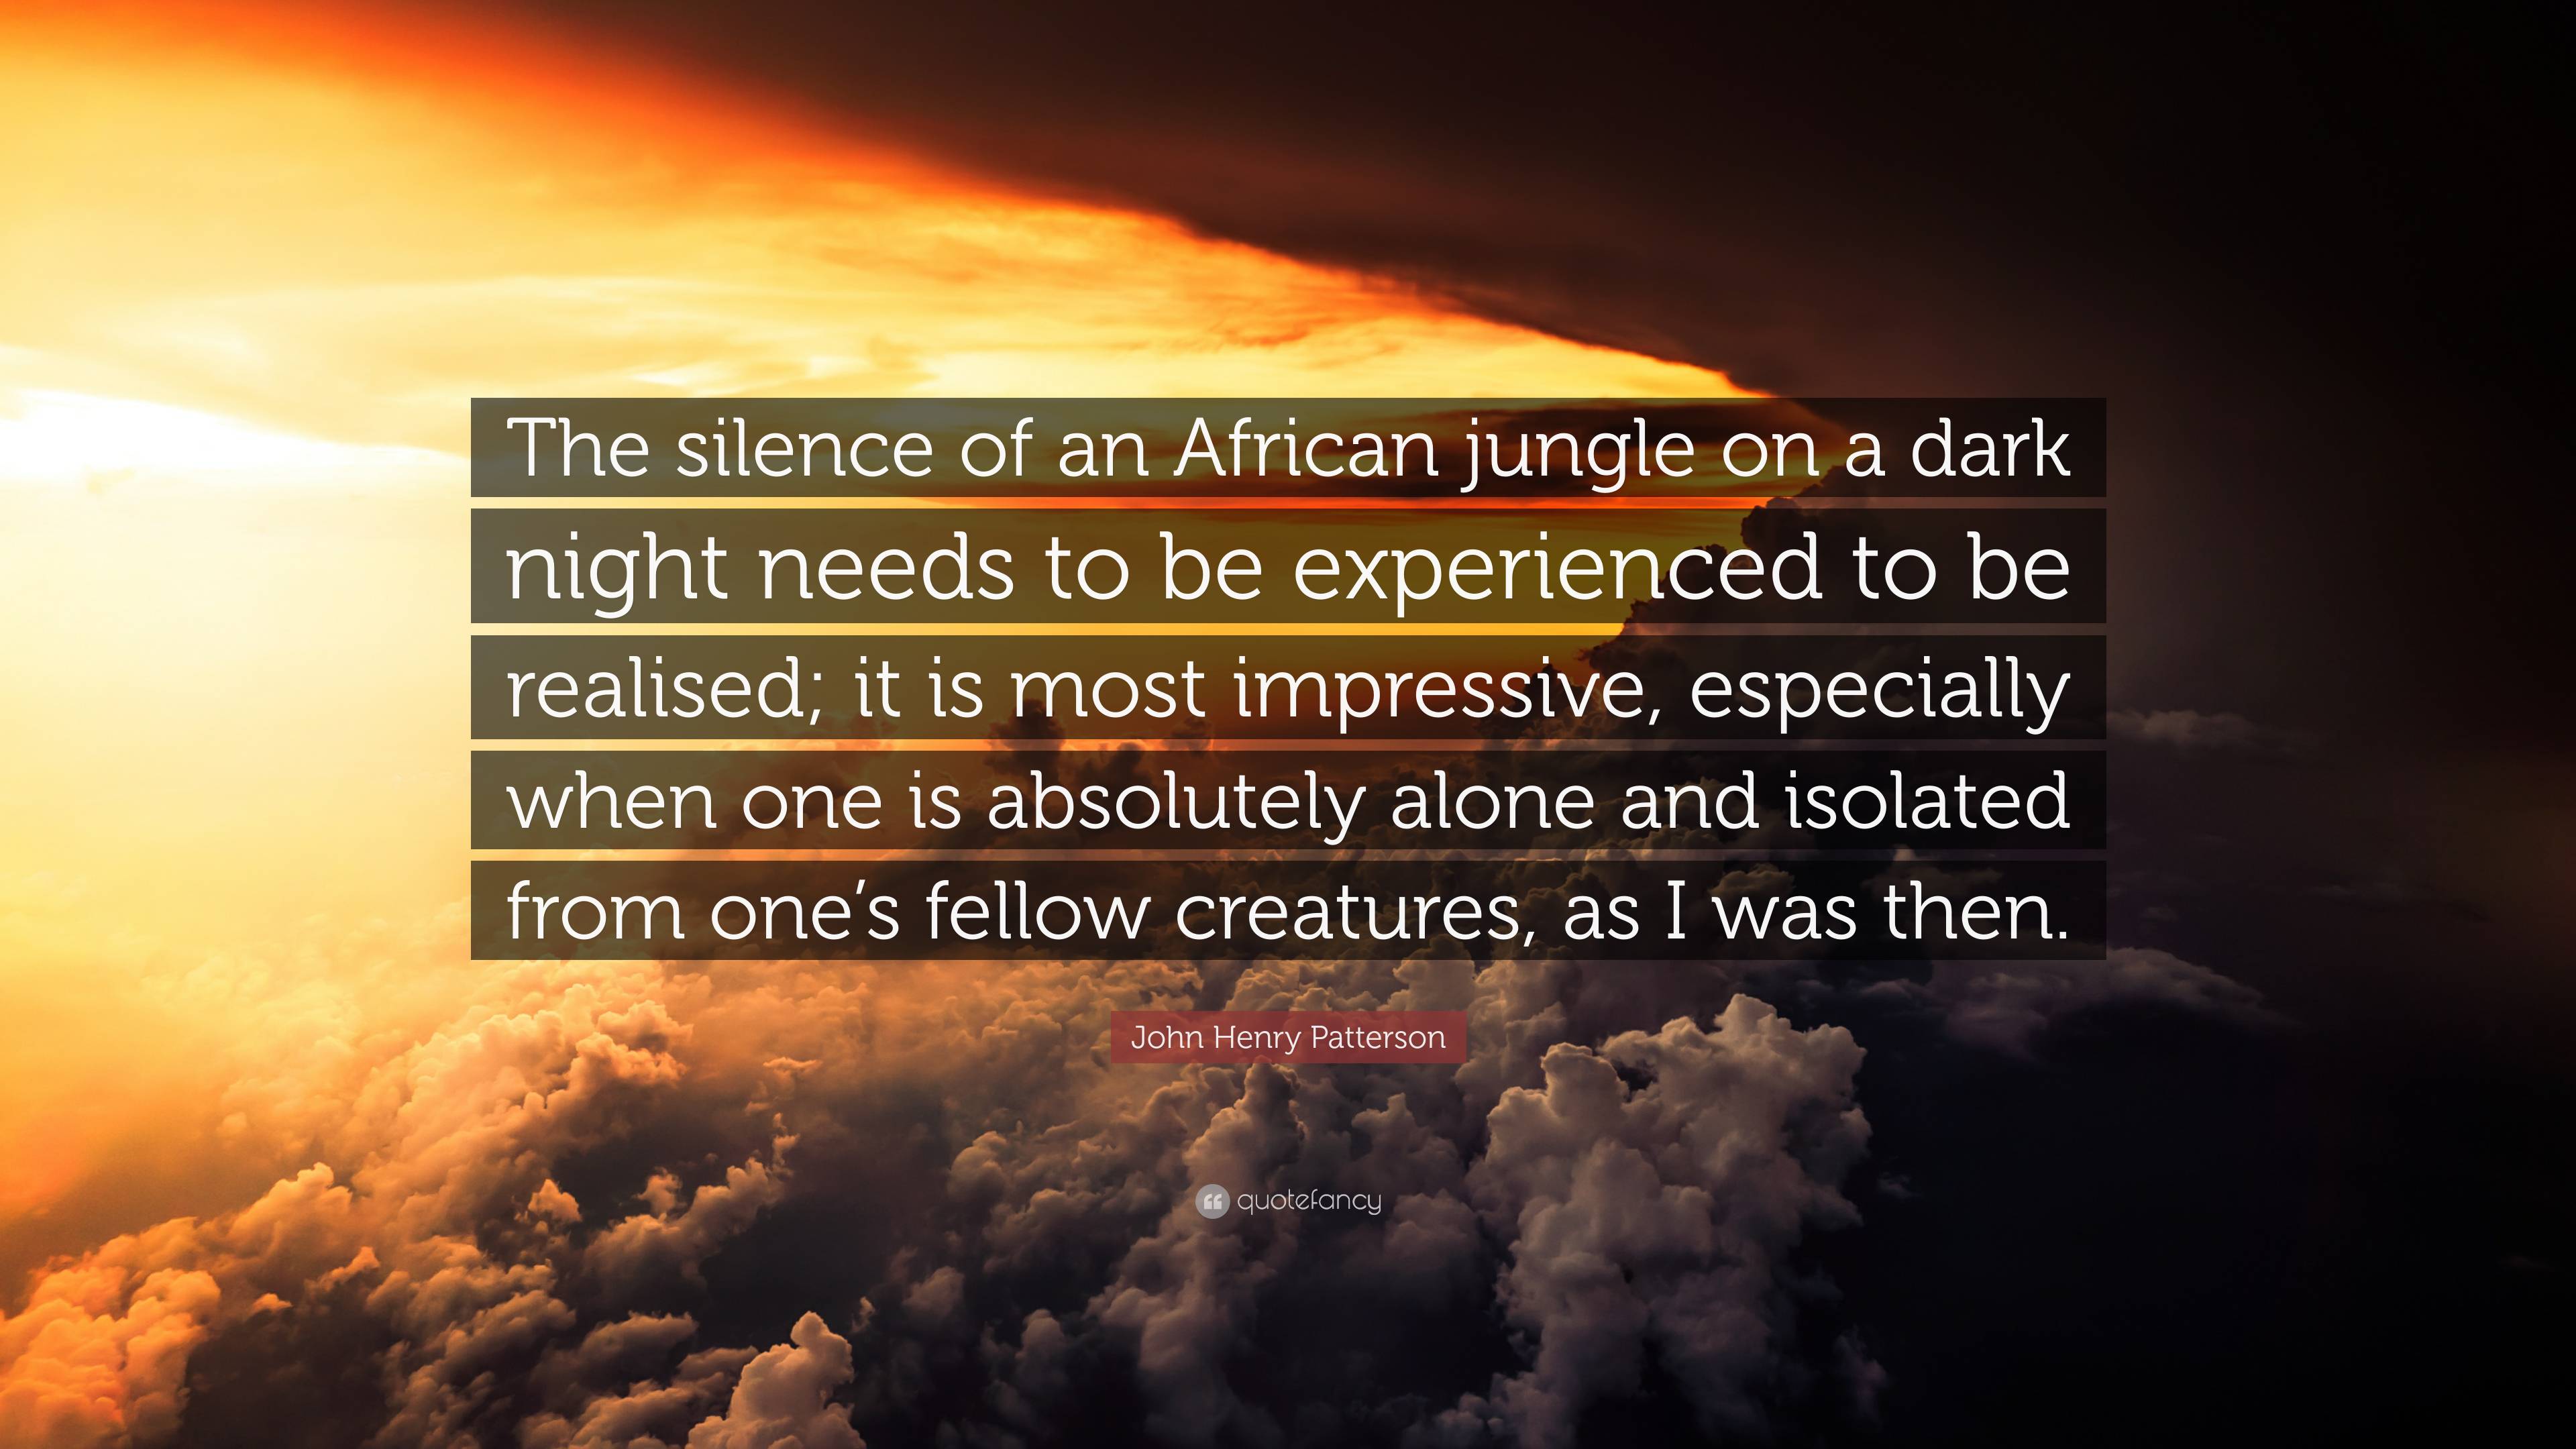 John Henry Patterson Quote: “The silence of an African jungle on a dark ...